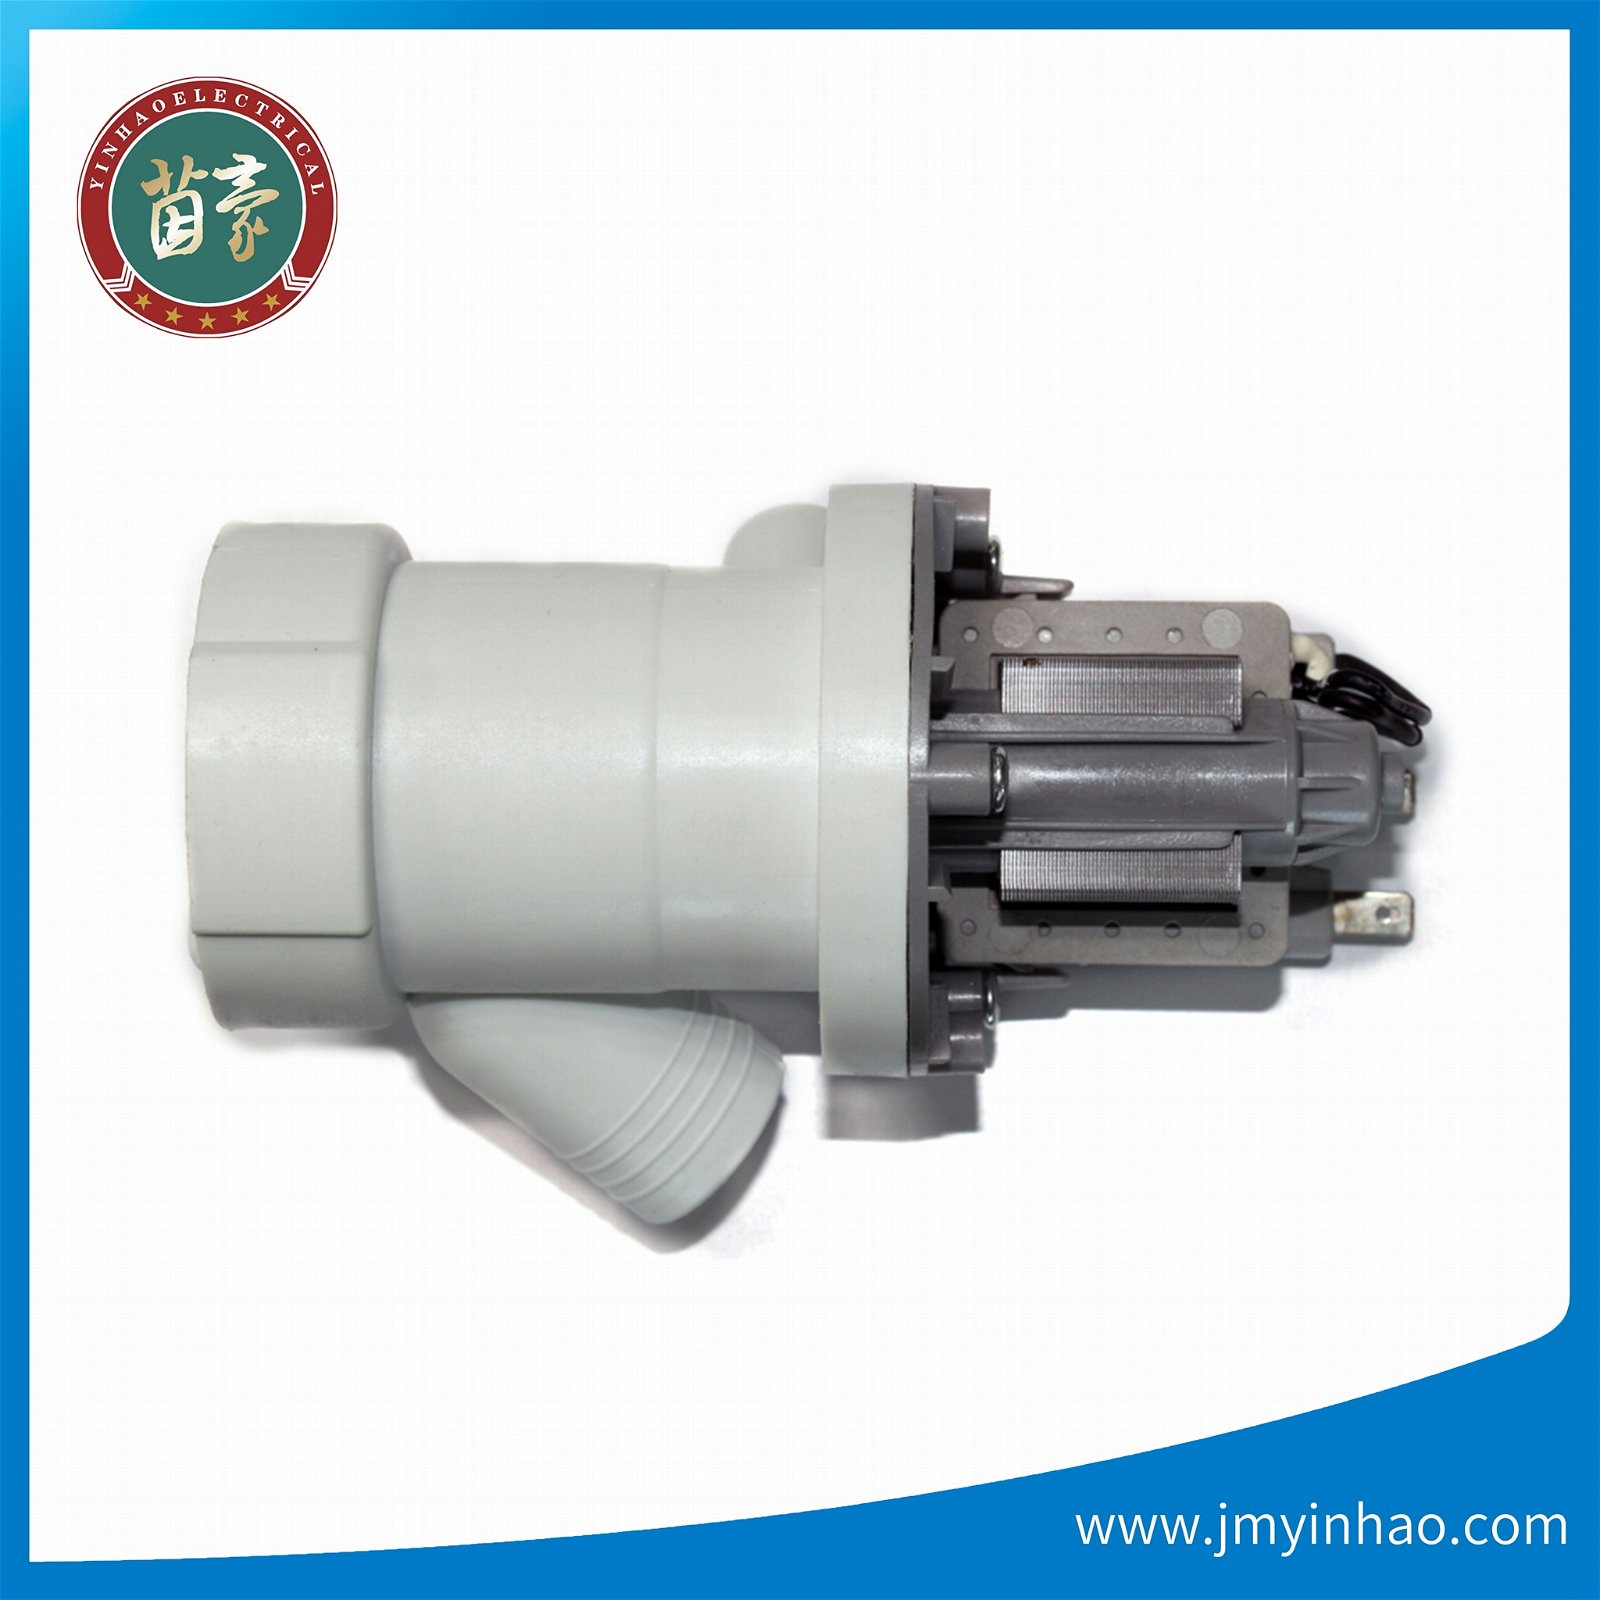 Permanent magnet synchronous drain pump for washing machine 3